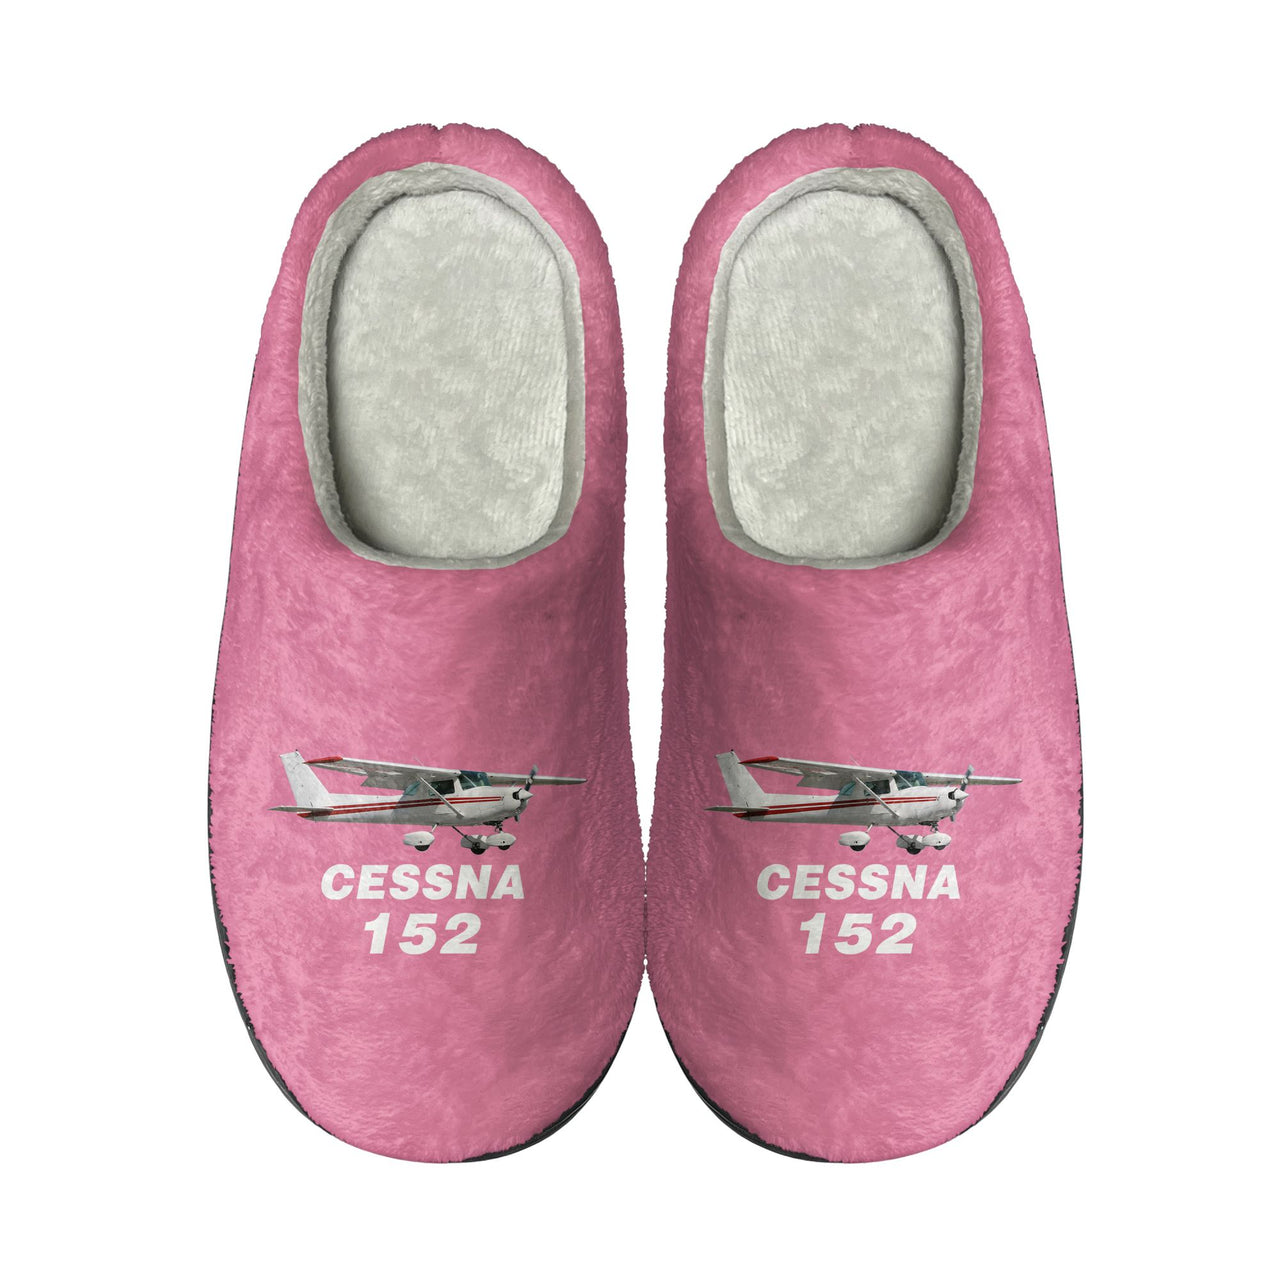 The Cessna 152 Designed Cotton Slippers